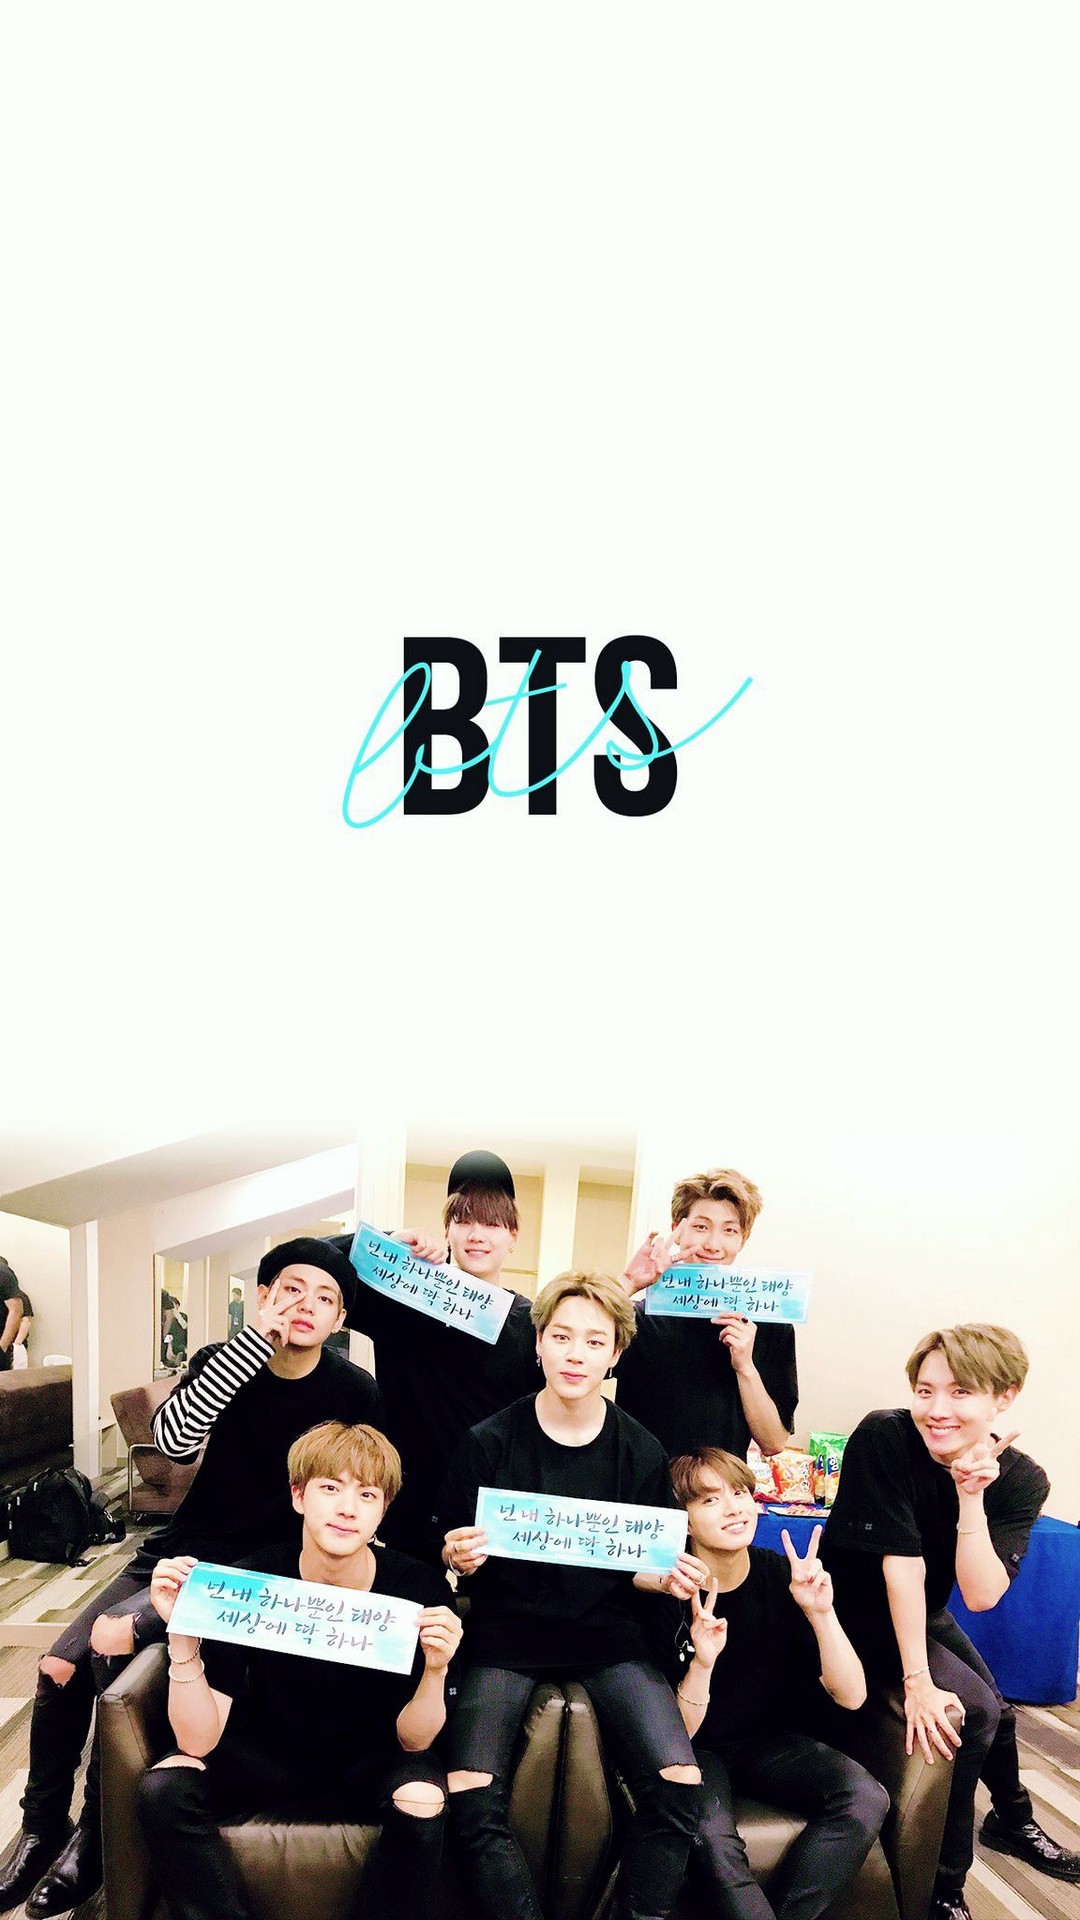 BTS Wallpaper For Phone HD With high-resolution 1080X1920 pixel. Download all Mobile Wallpapers and Use them as wallpapers for your iPhone, Tablet, iPad, Android and other mobile devices